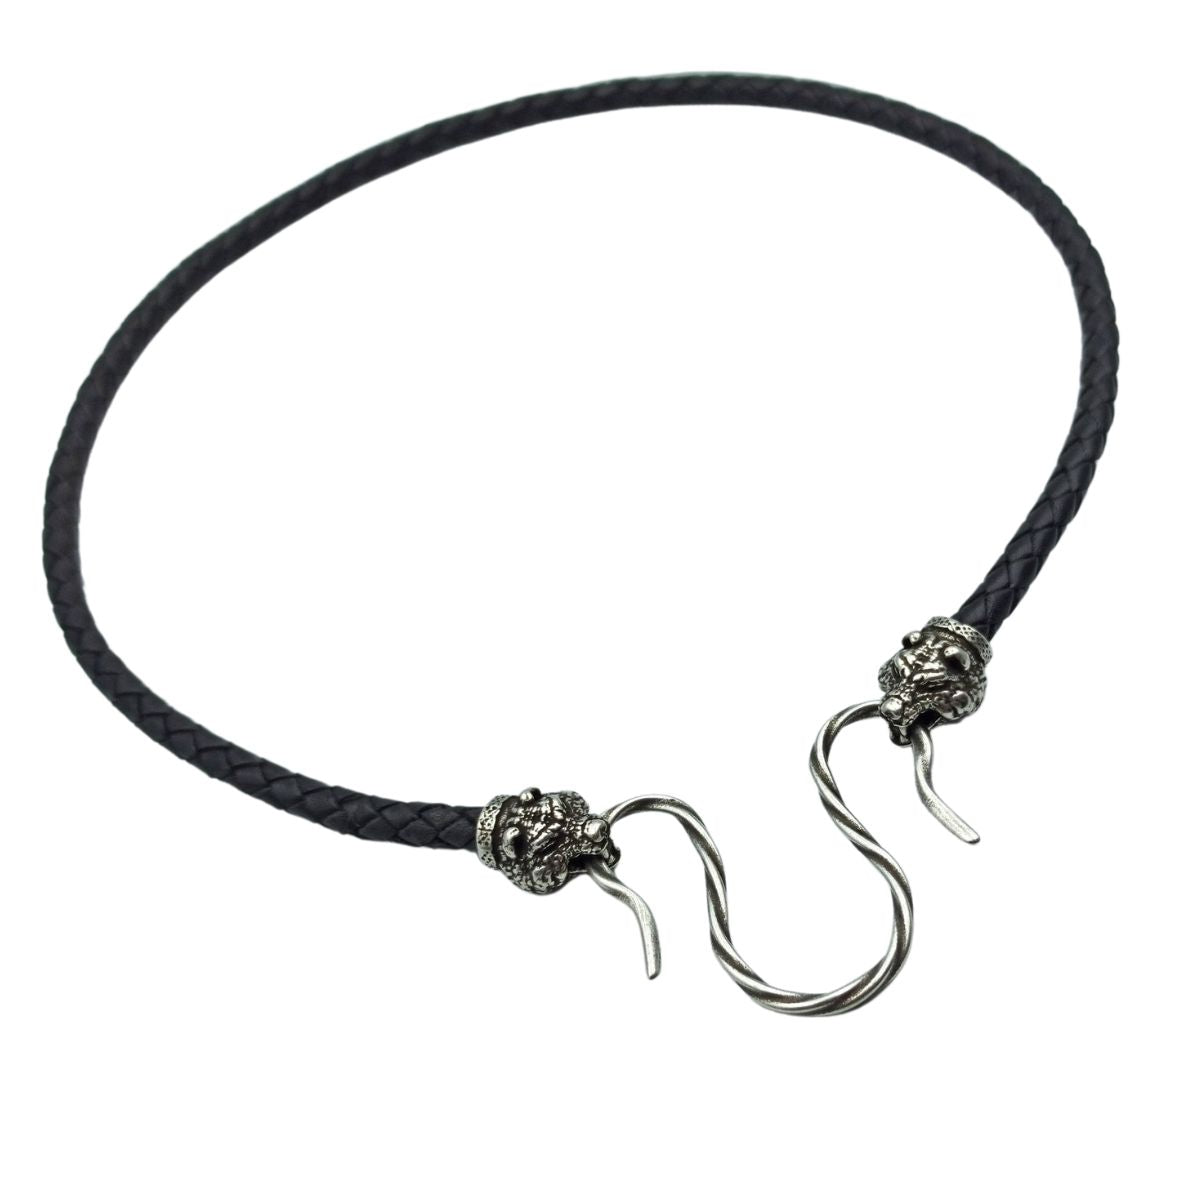 Bear head leather necklace with Silver plated clasps